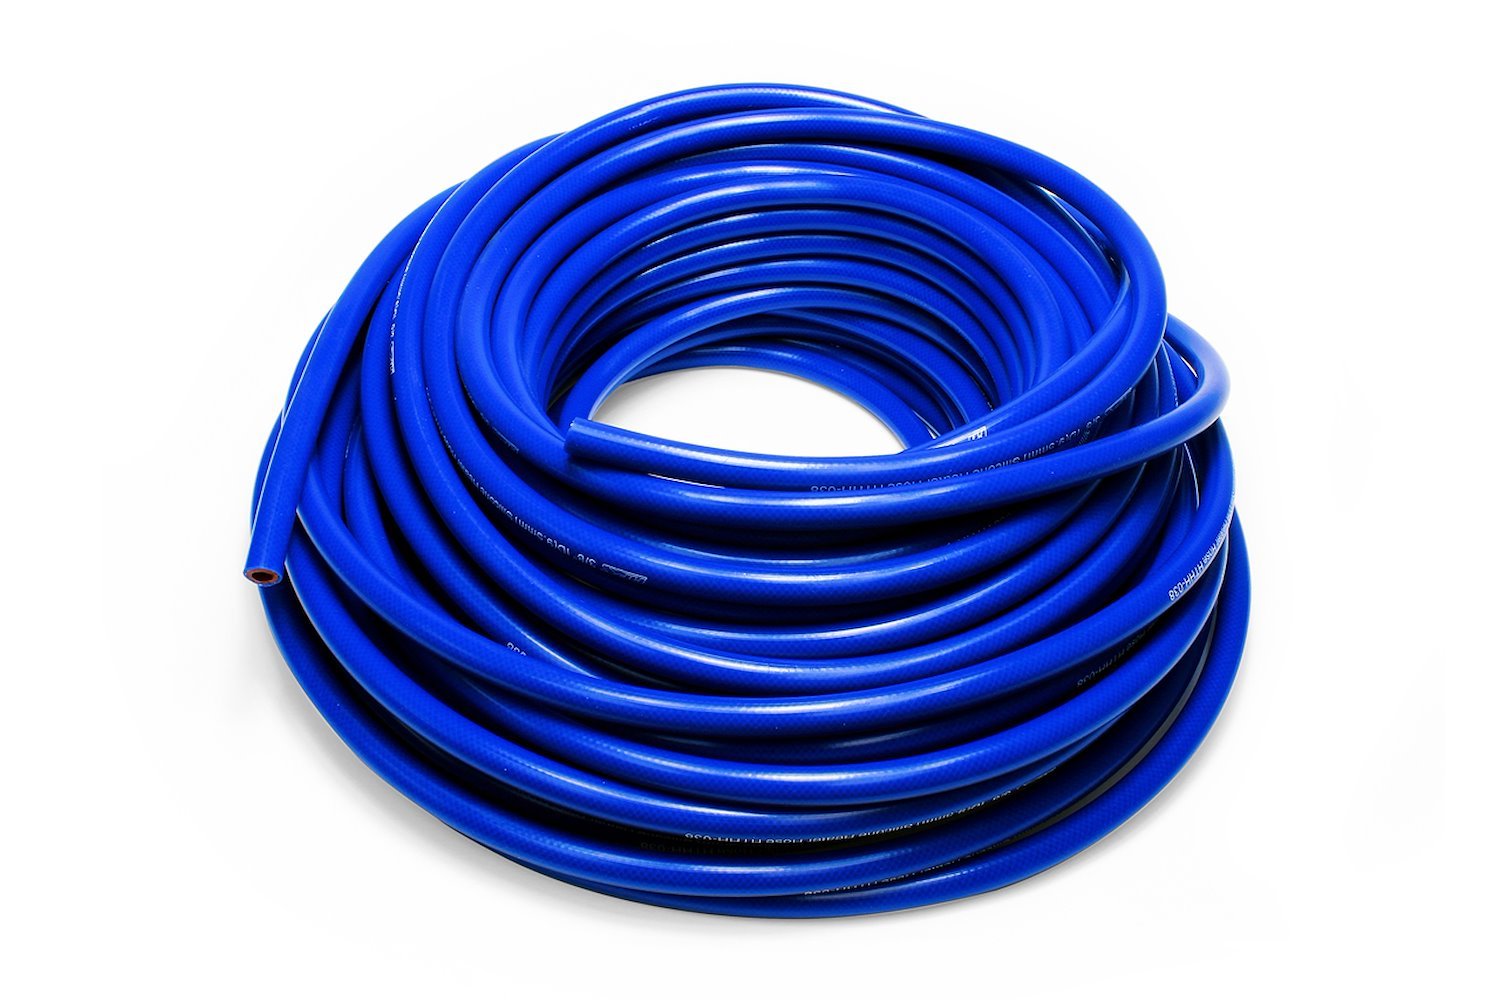 HTHH-087-BLUEx50 Silicone Heater Hose Tubing, High-Temp 1-Ply Reinforced, 7/8 in. ID, 50 ft. Roll, Blue